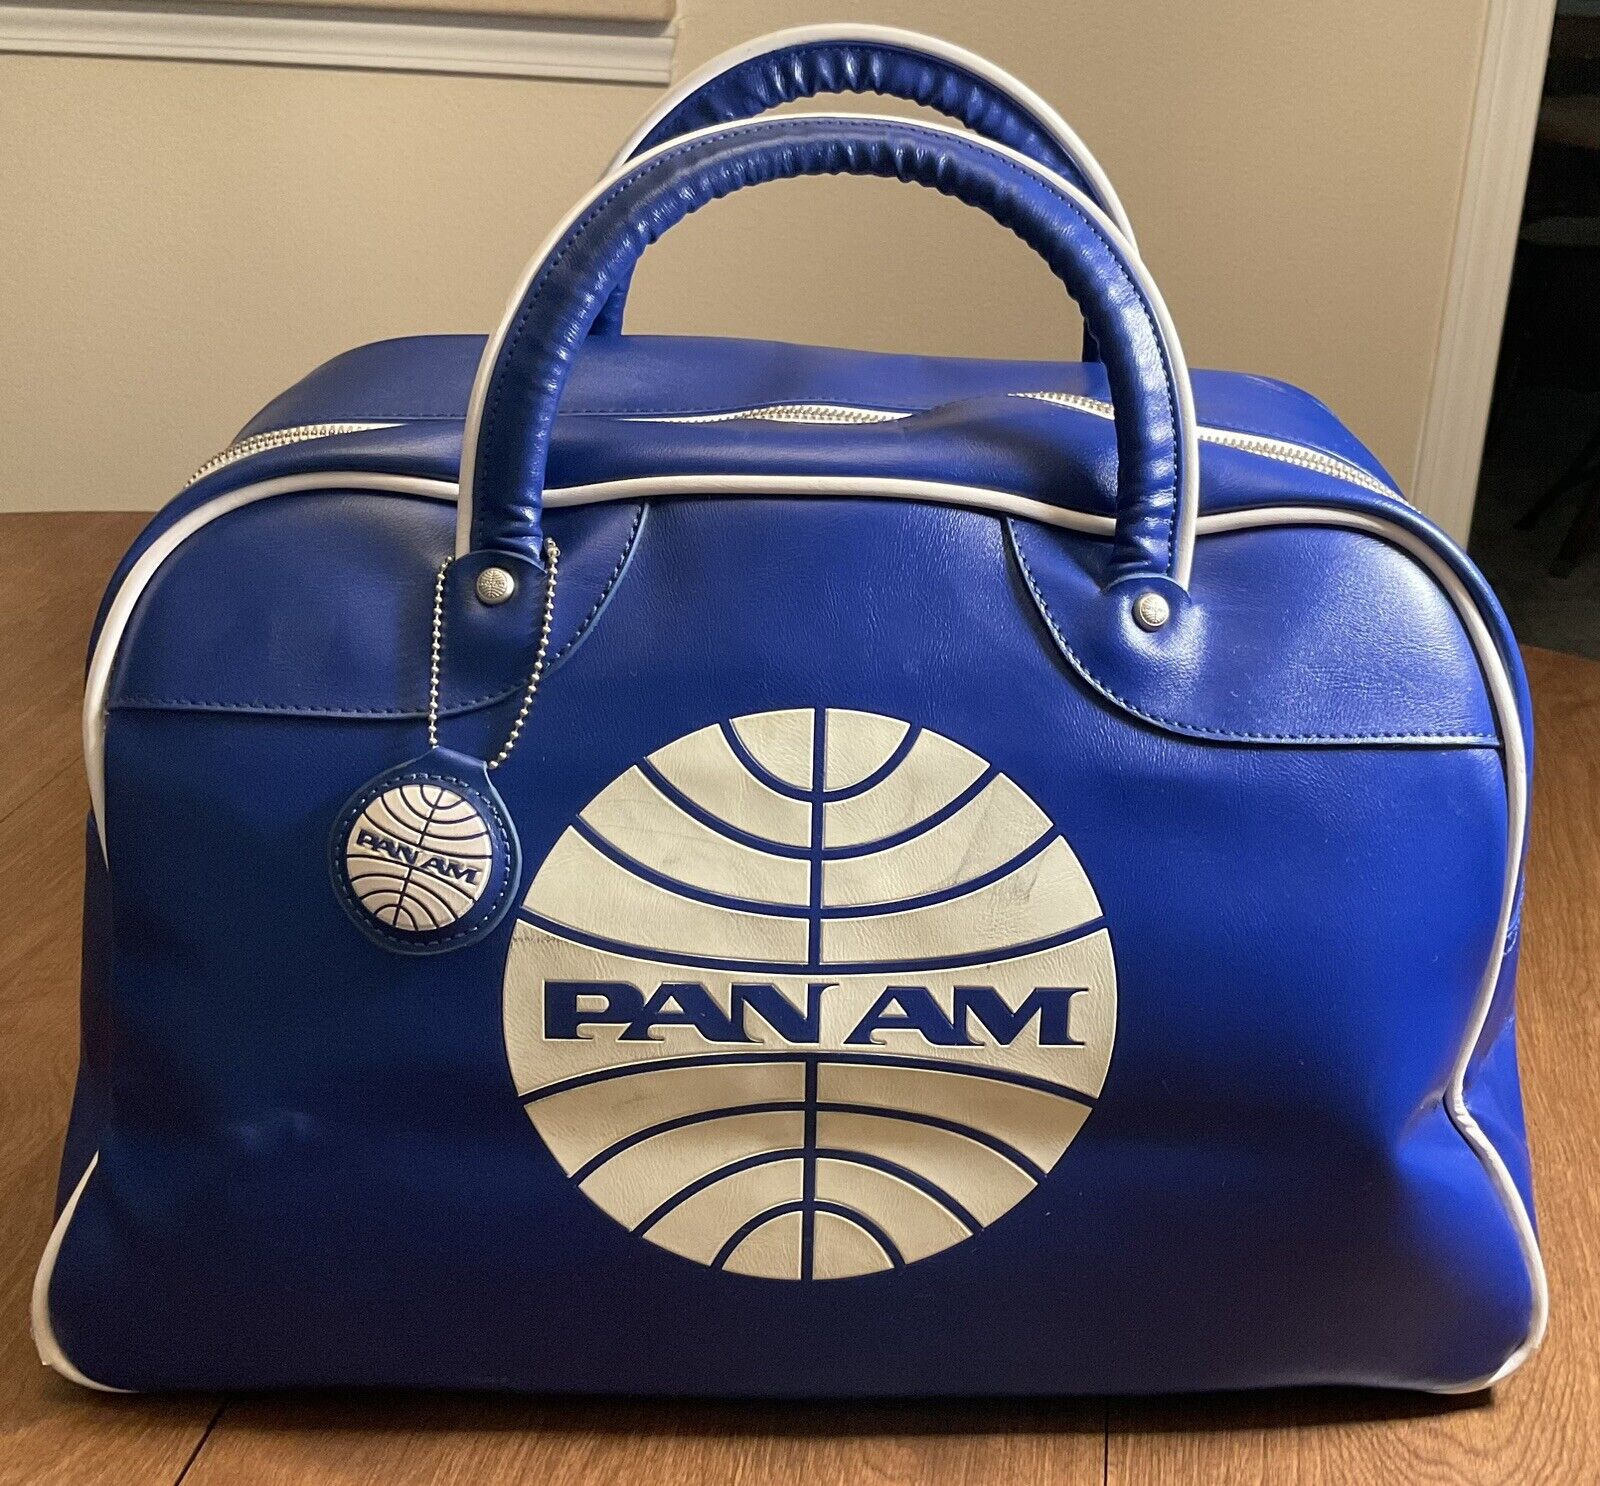 Pan AM Carry On Blue Bag With Certified Label